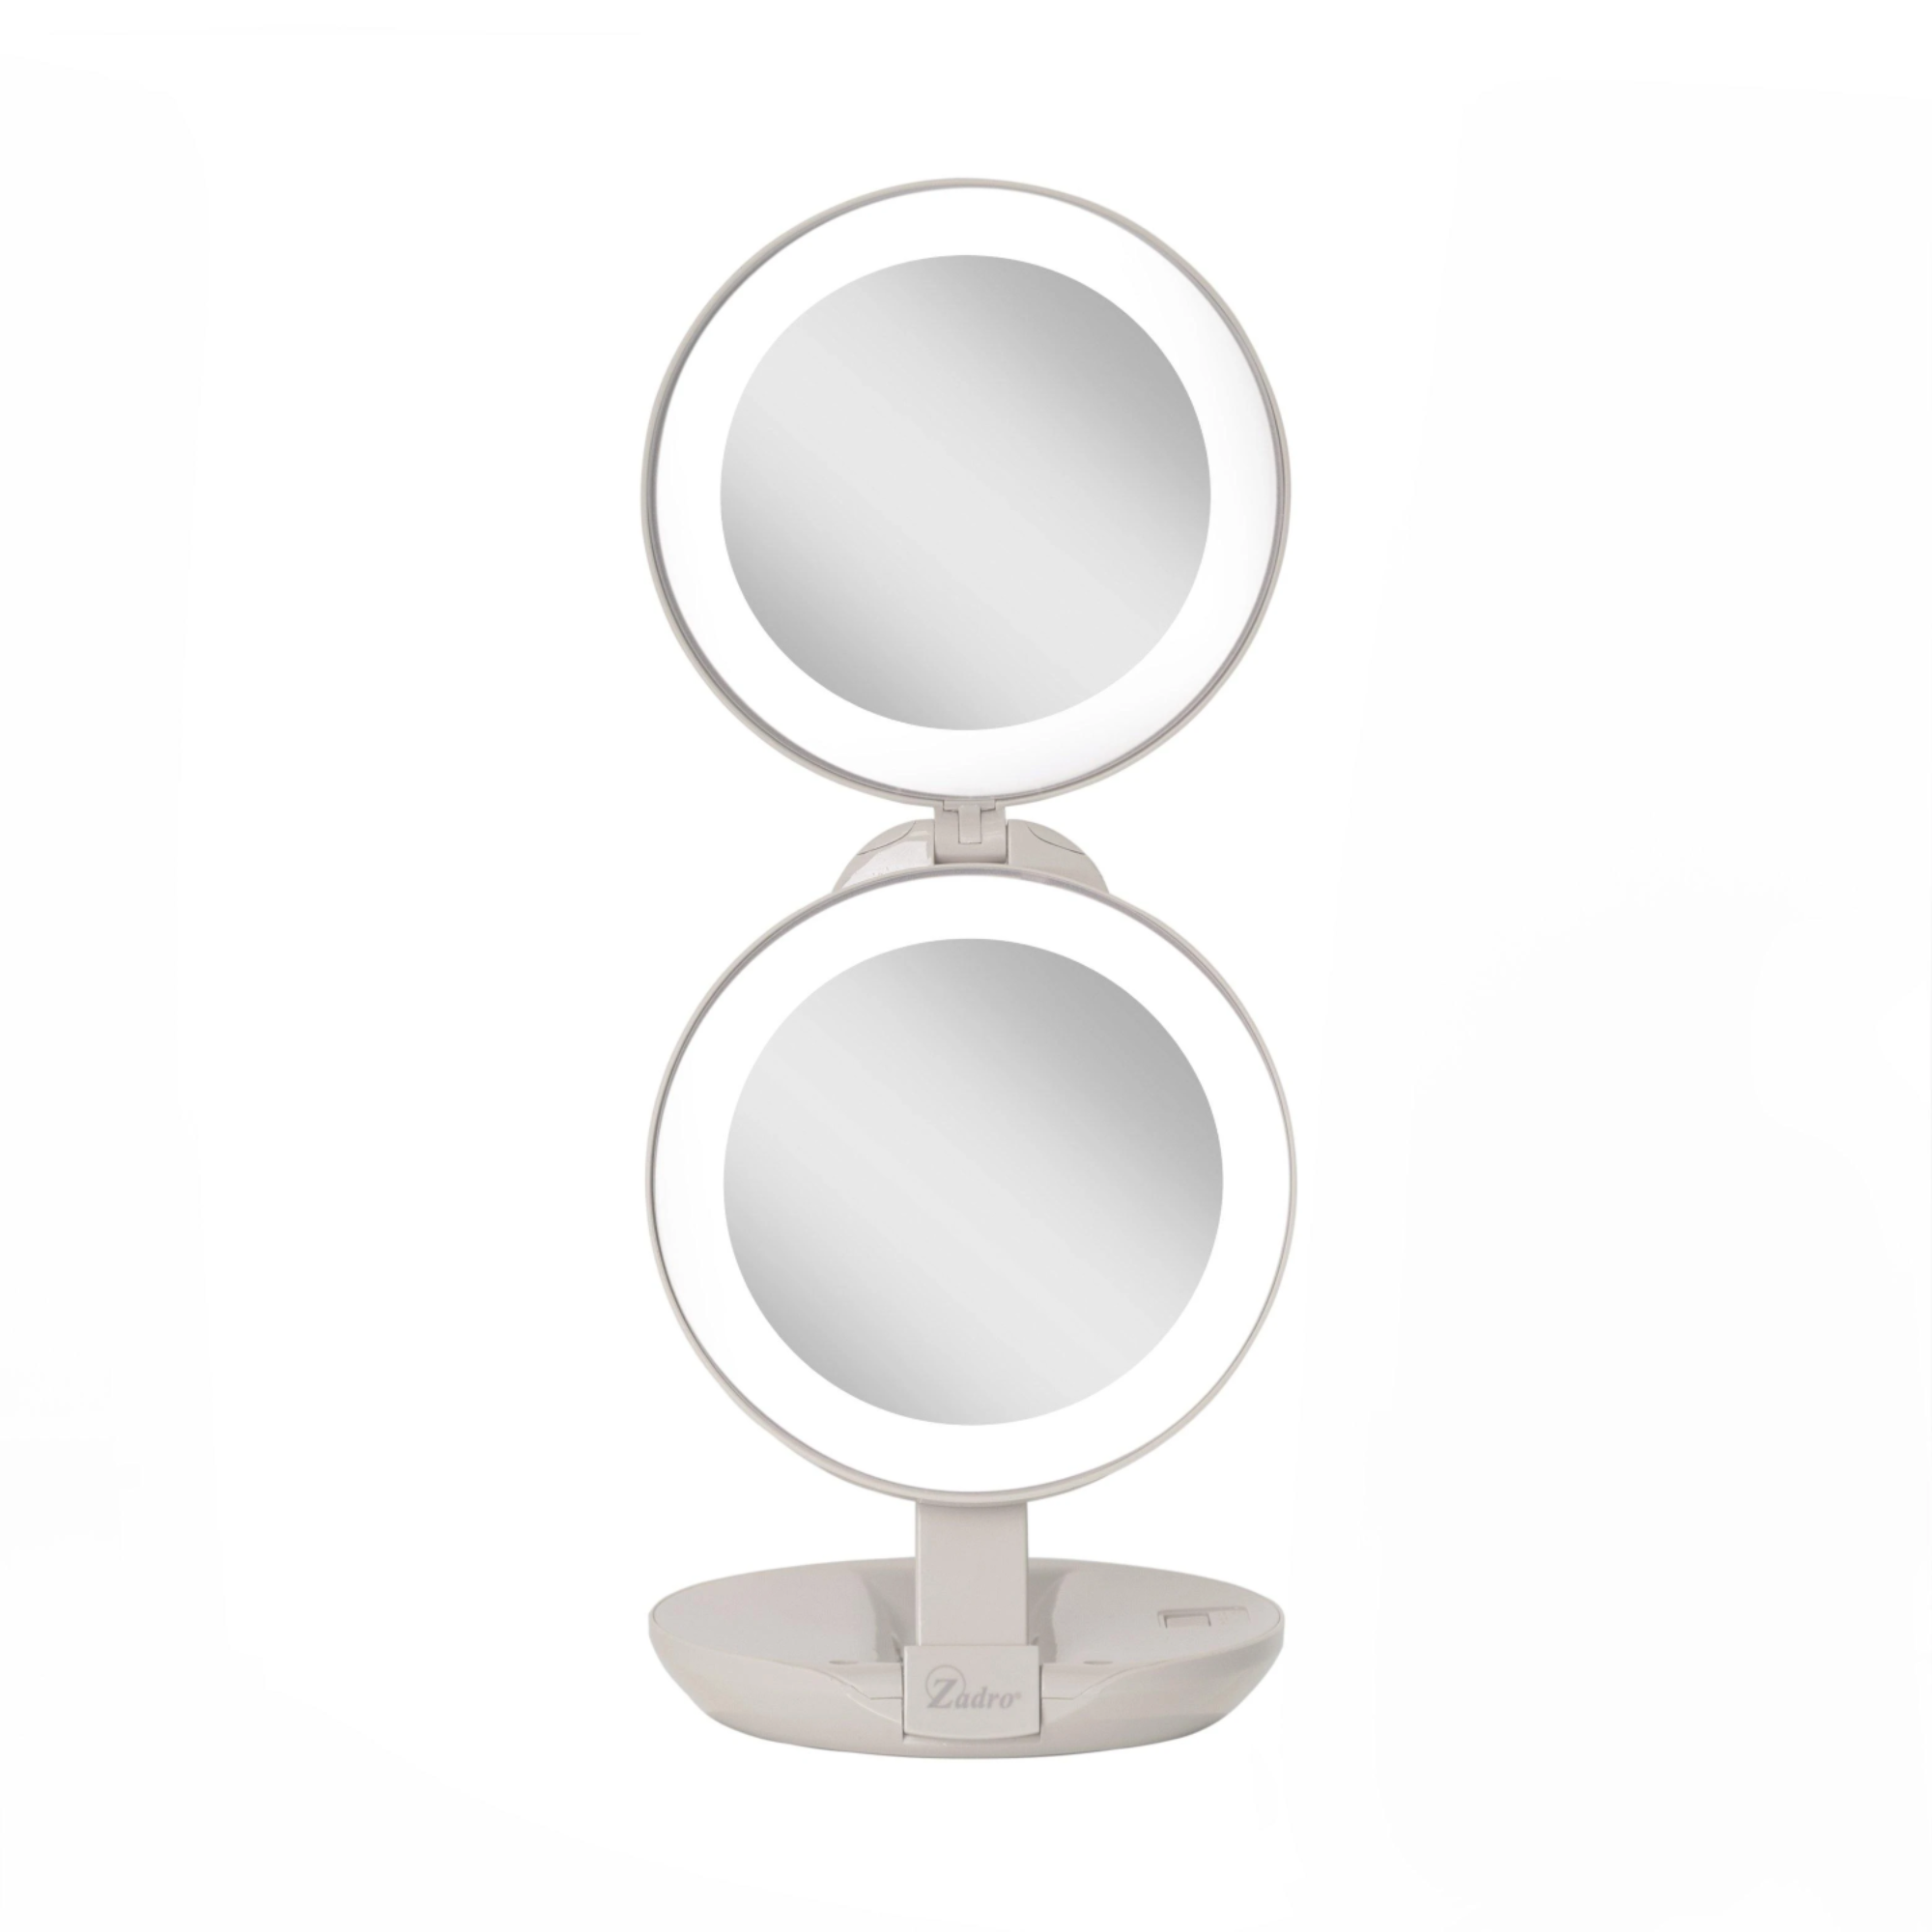 Zadro 4.75" Round Dual LED Lighted Travel Mirror 10X/1X / TAUPE